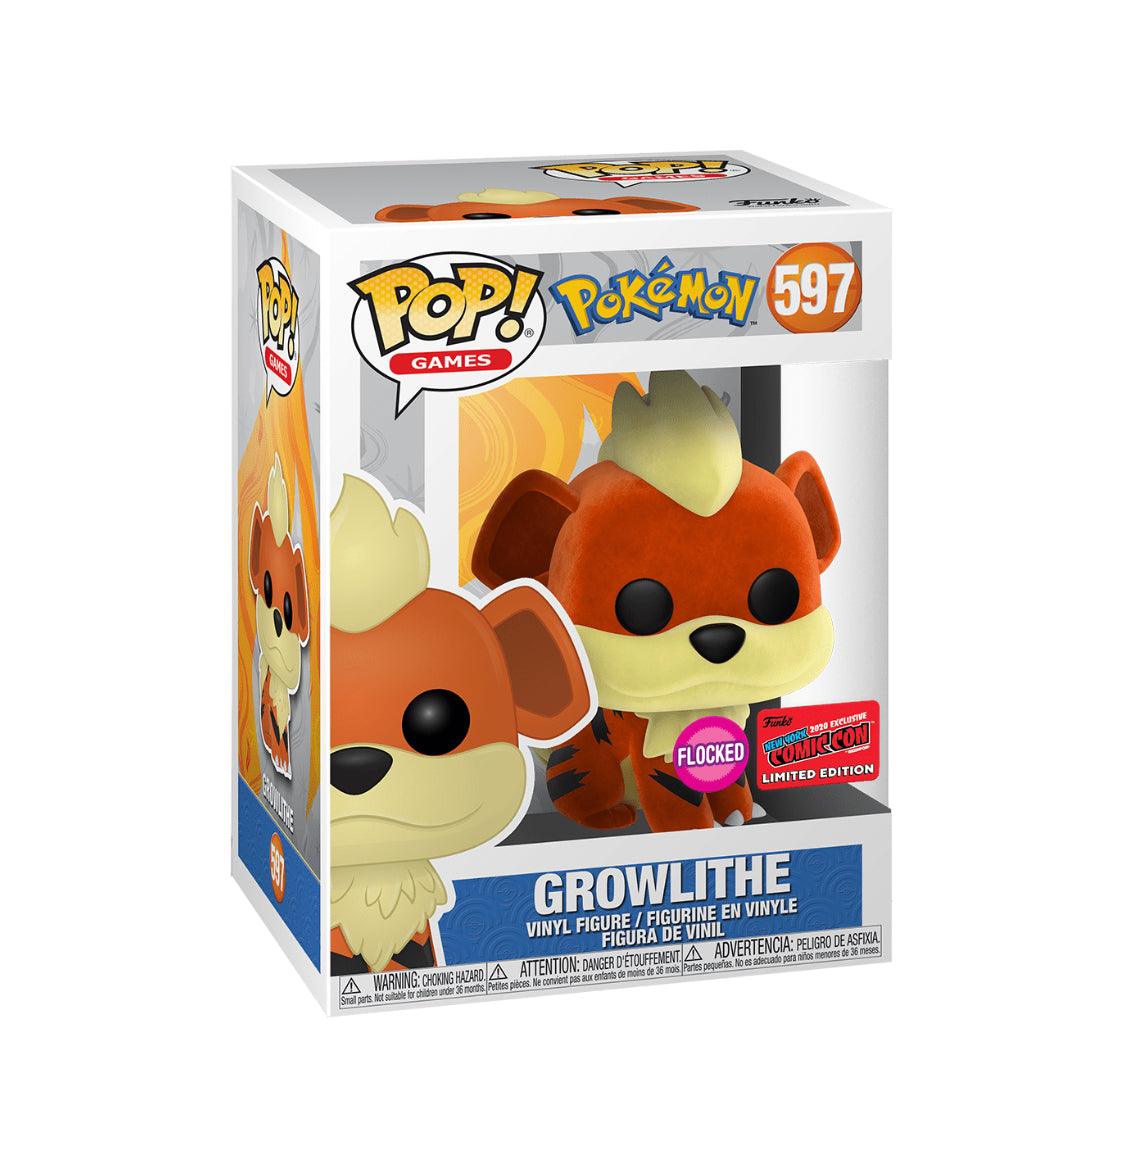 Pop! Games - Pokemon - Growlithe - #597 - Flocked & EXCLUSIVE 2020 New York Comic Con LIMITED Edition - Hobby Champion Inc